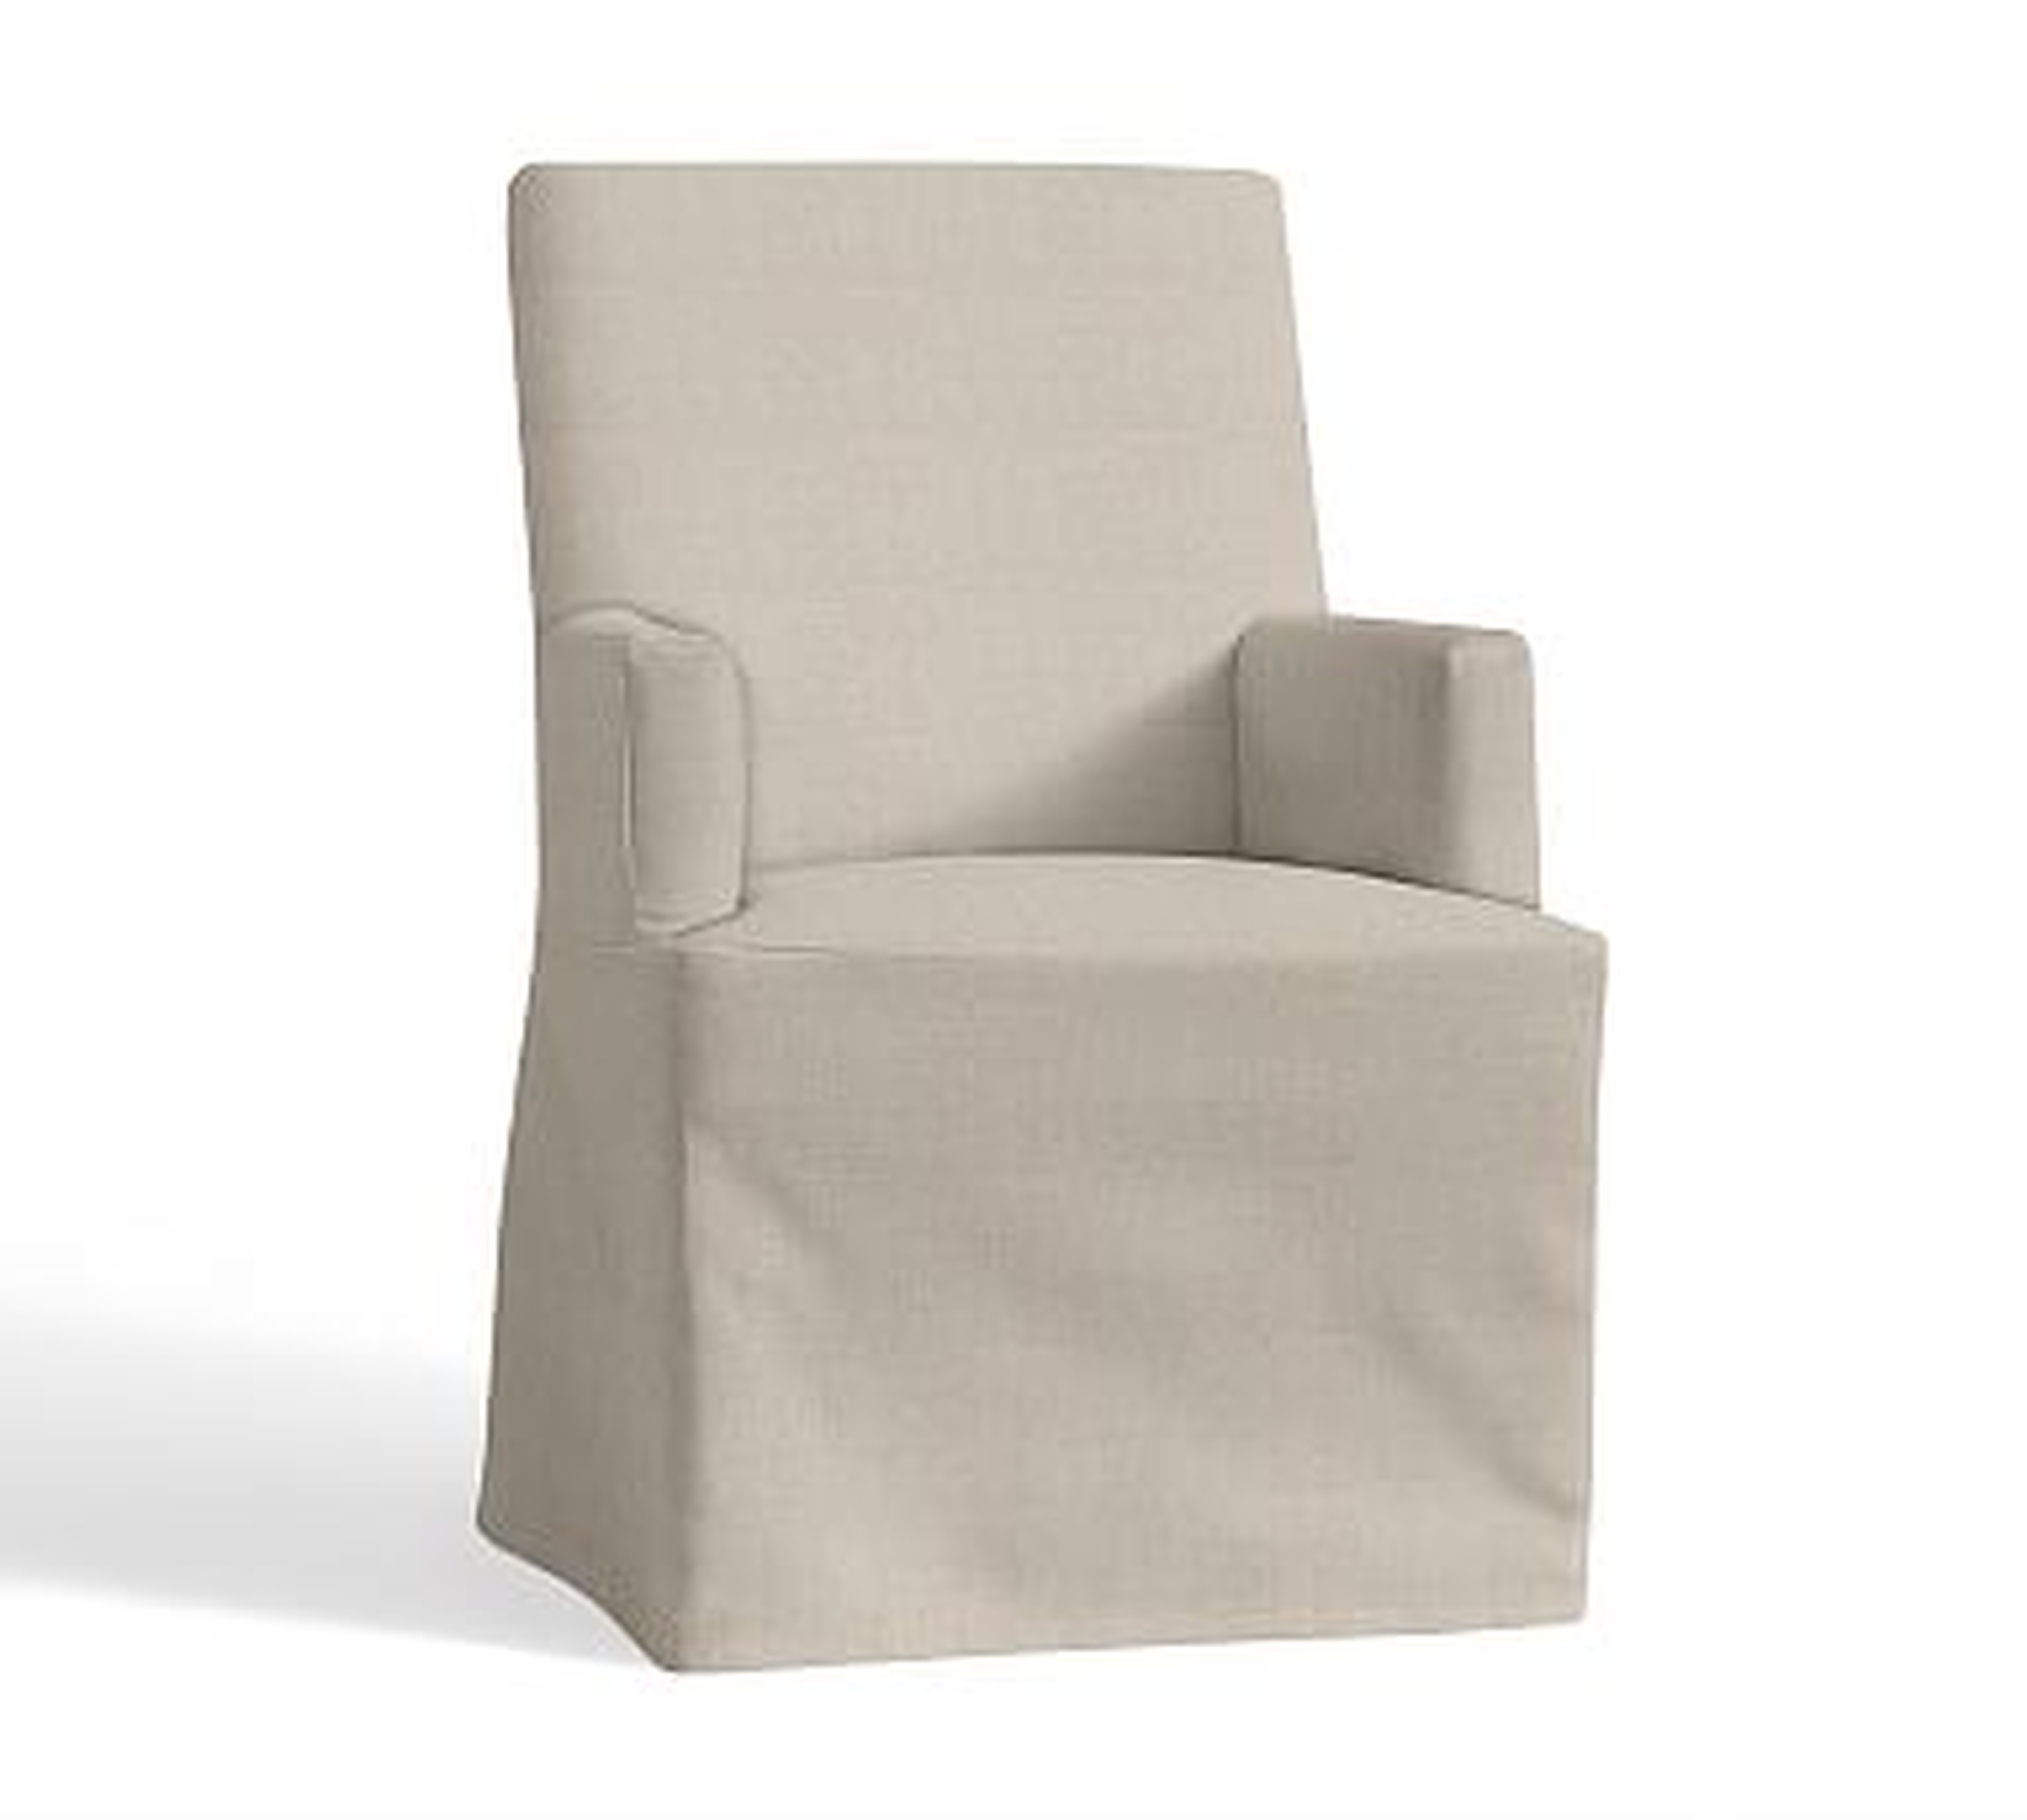 PB Comfort Square Slipcovered Dining Arm Chair, Performance Everydaylinen(TM) by Crypton(R) Home Oatmeal - Pottery Barn